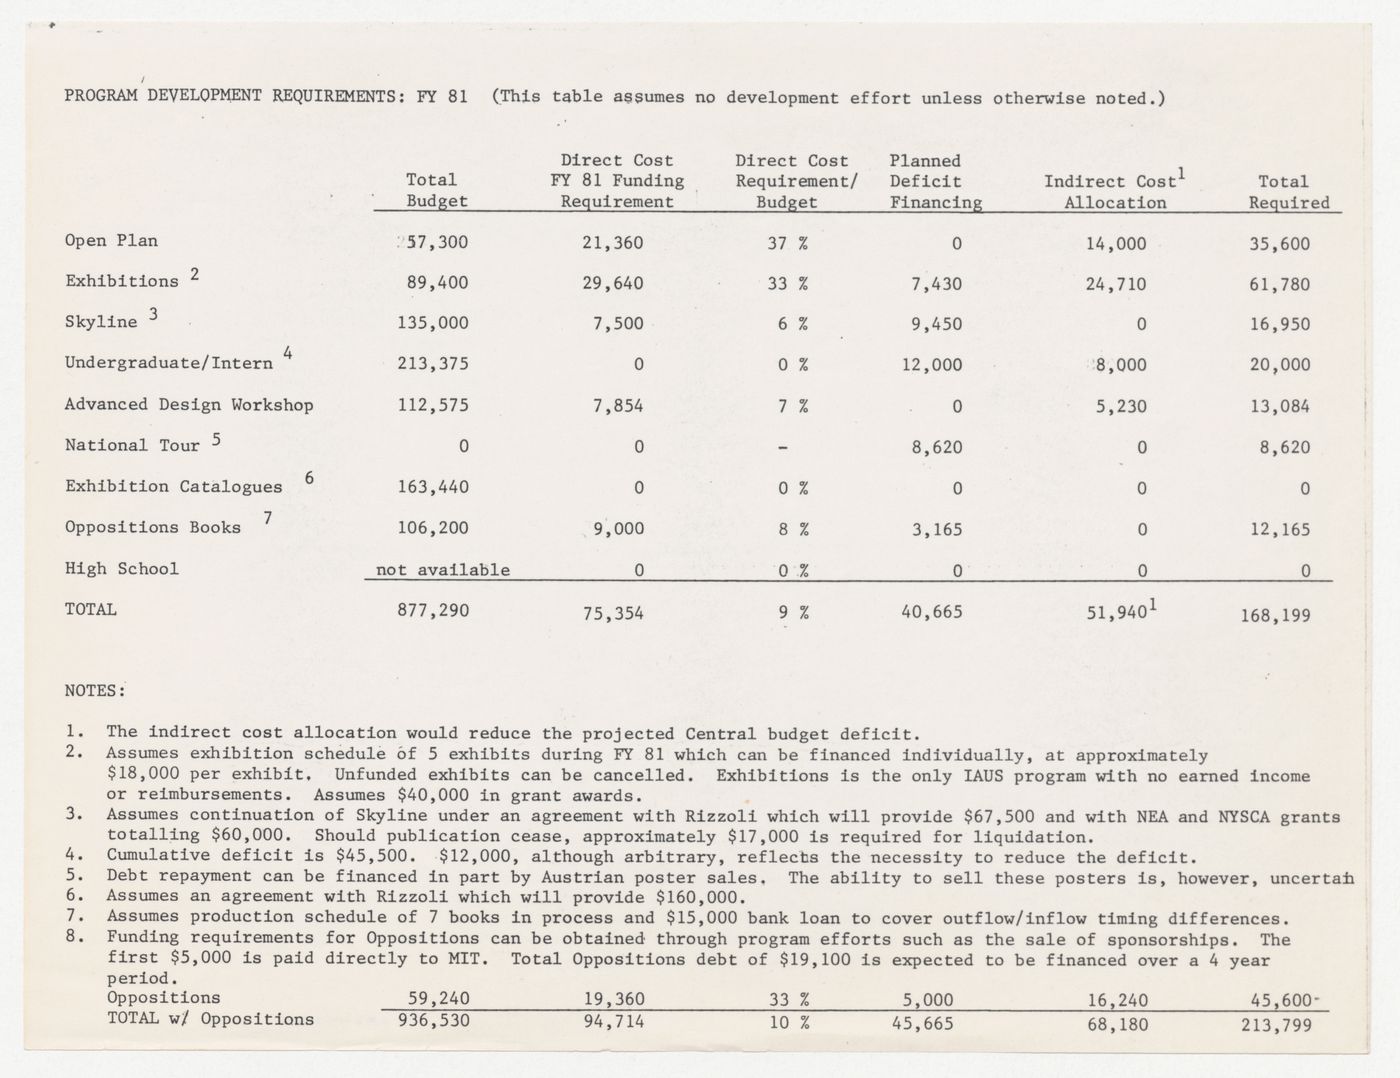 Program development requirements for financial year 1981